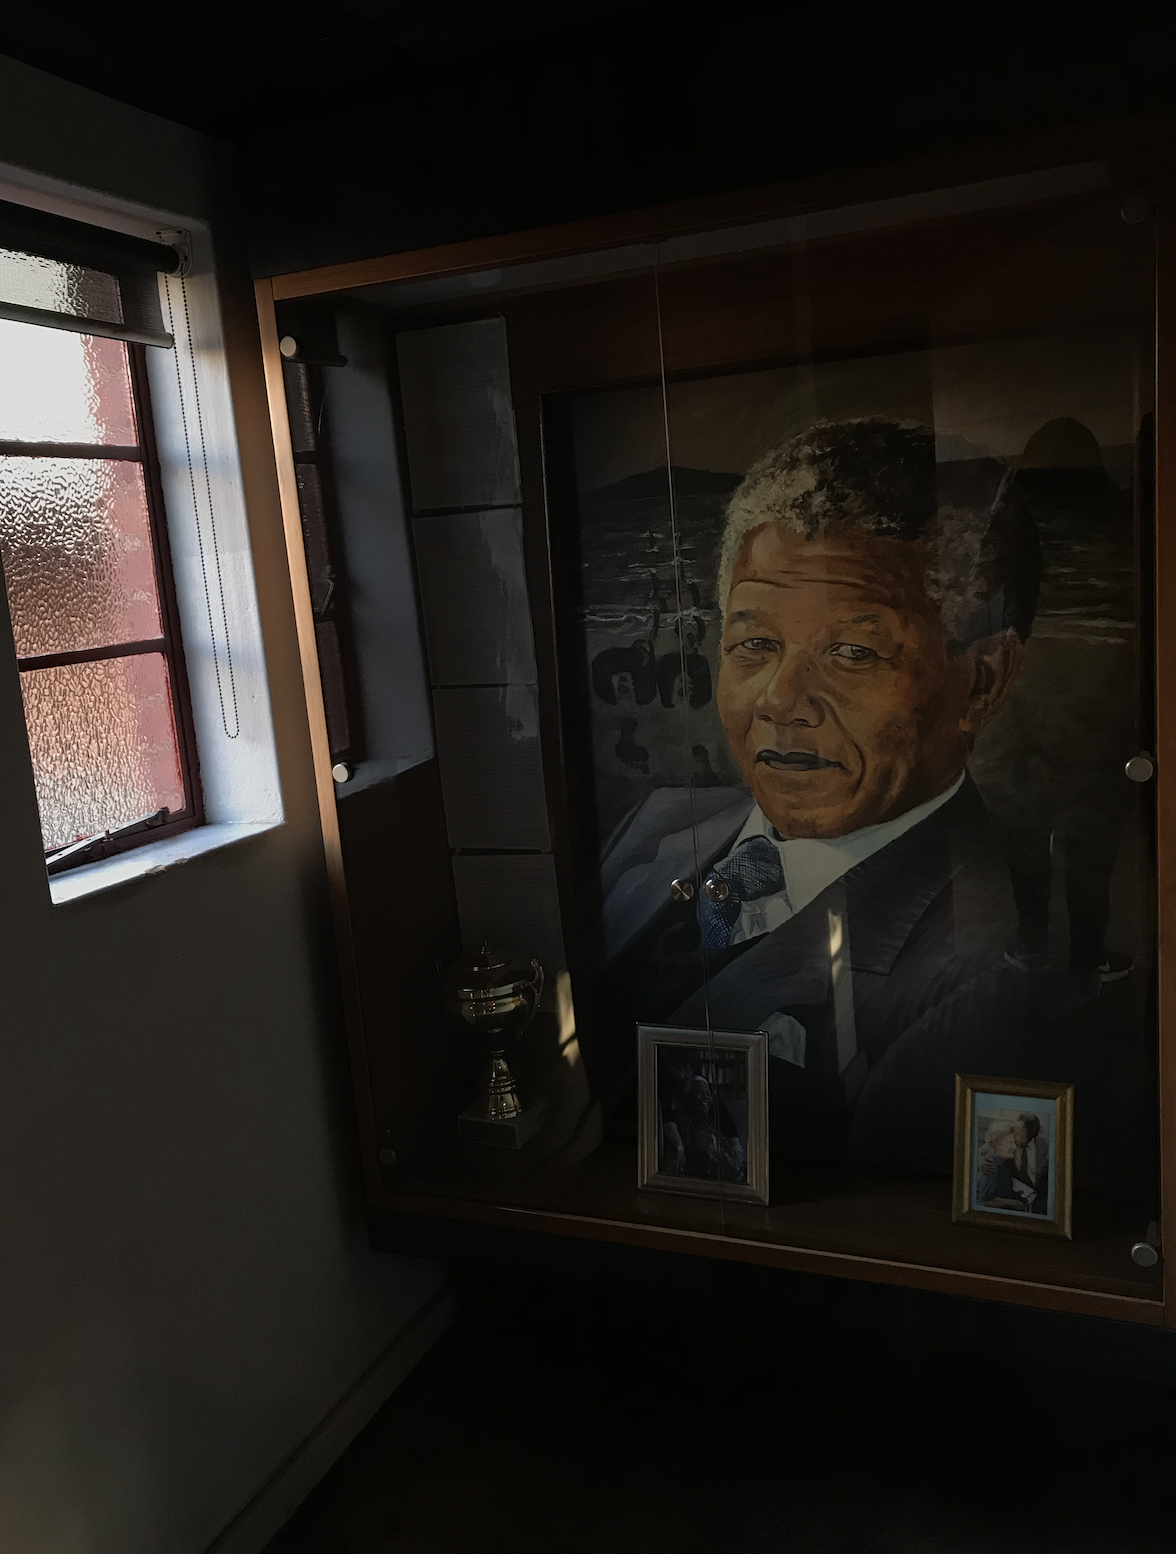 Food, Friends, and Freedom Fighters – First Week in Joburg